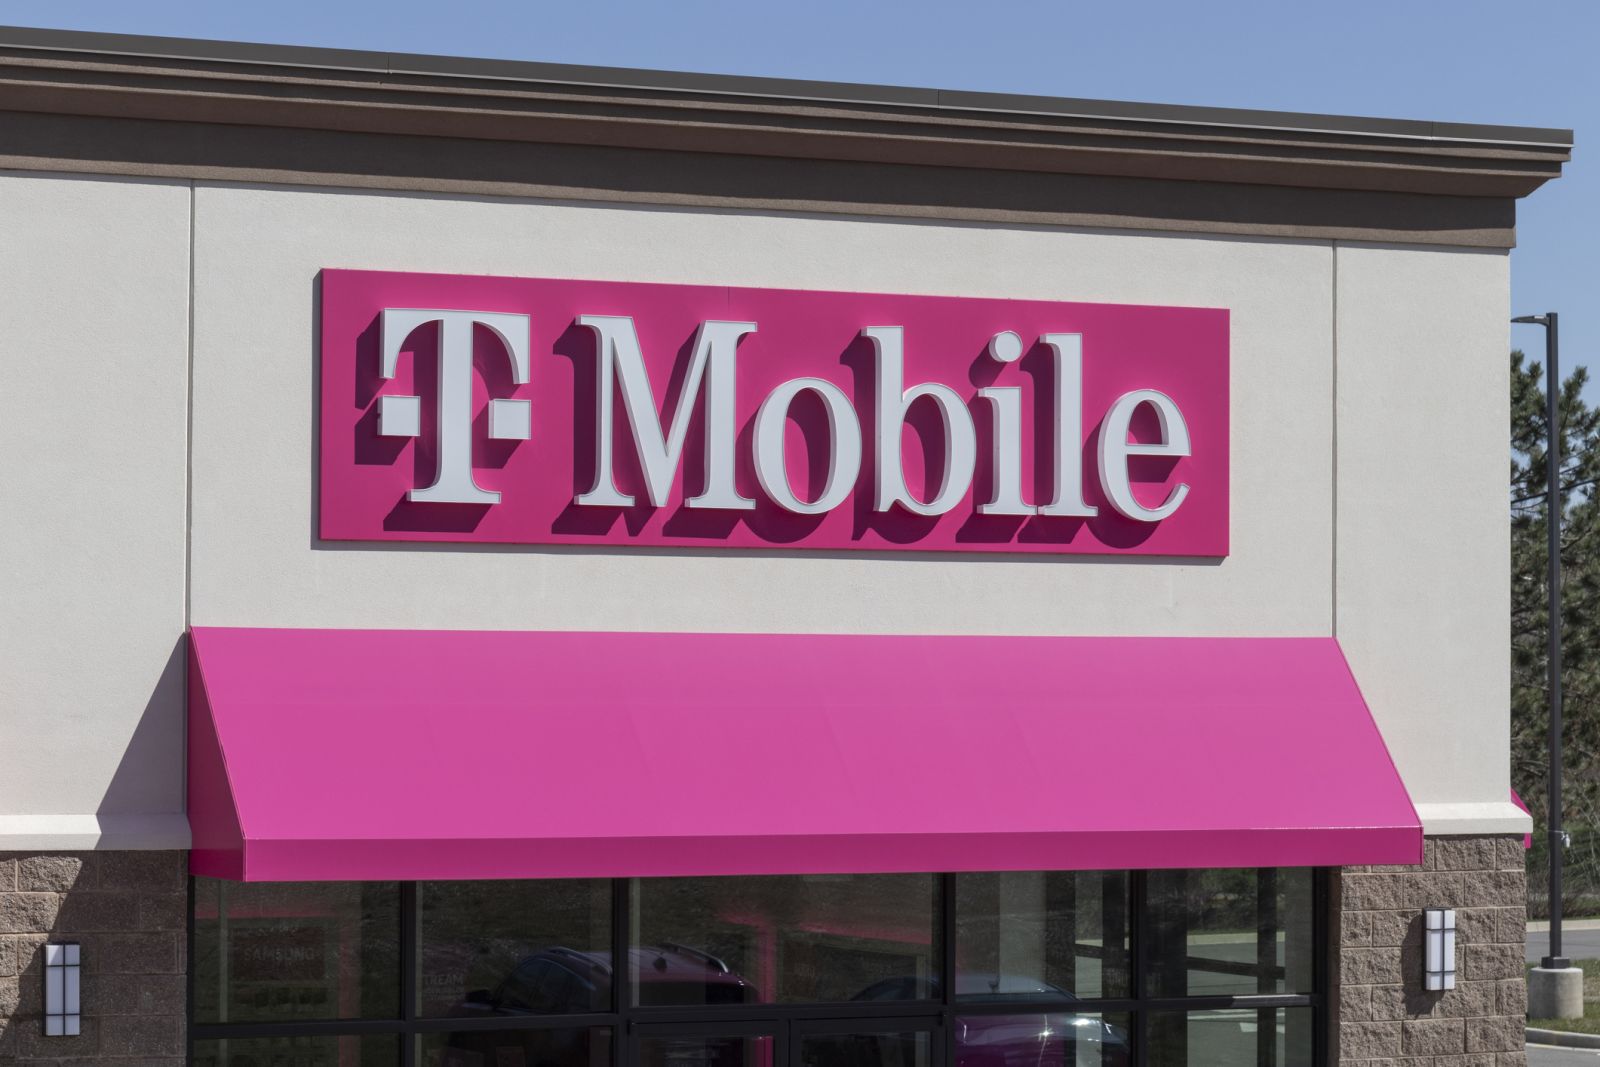 Communication Services - T-Mobile US Inc store signage by- jetcityimage via iStock